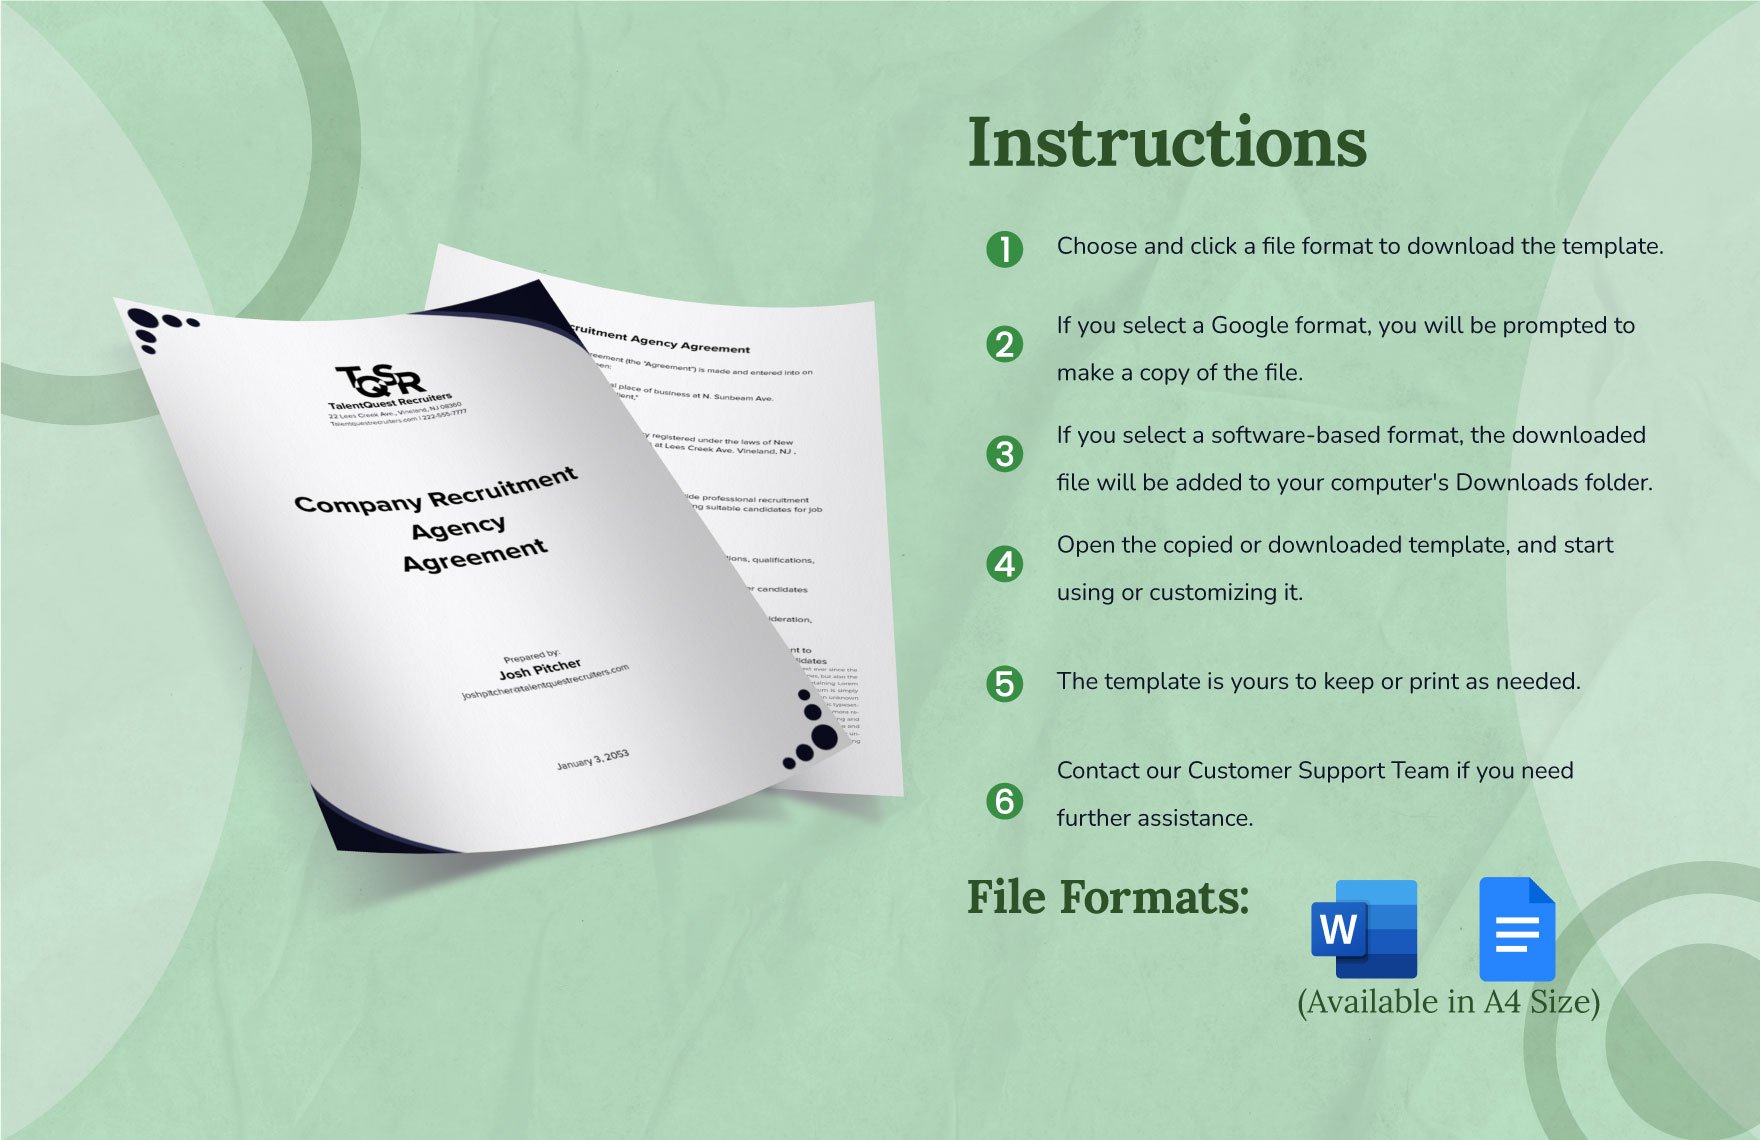 Company Recruitment Agency Agreement Template